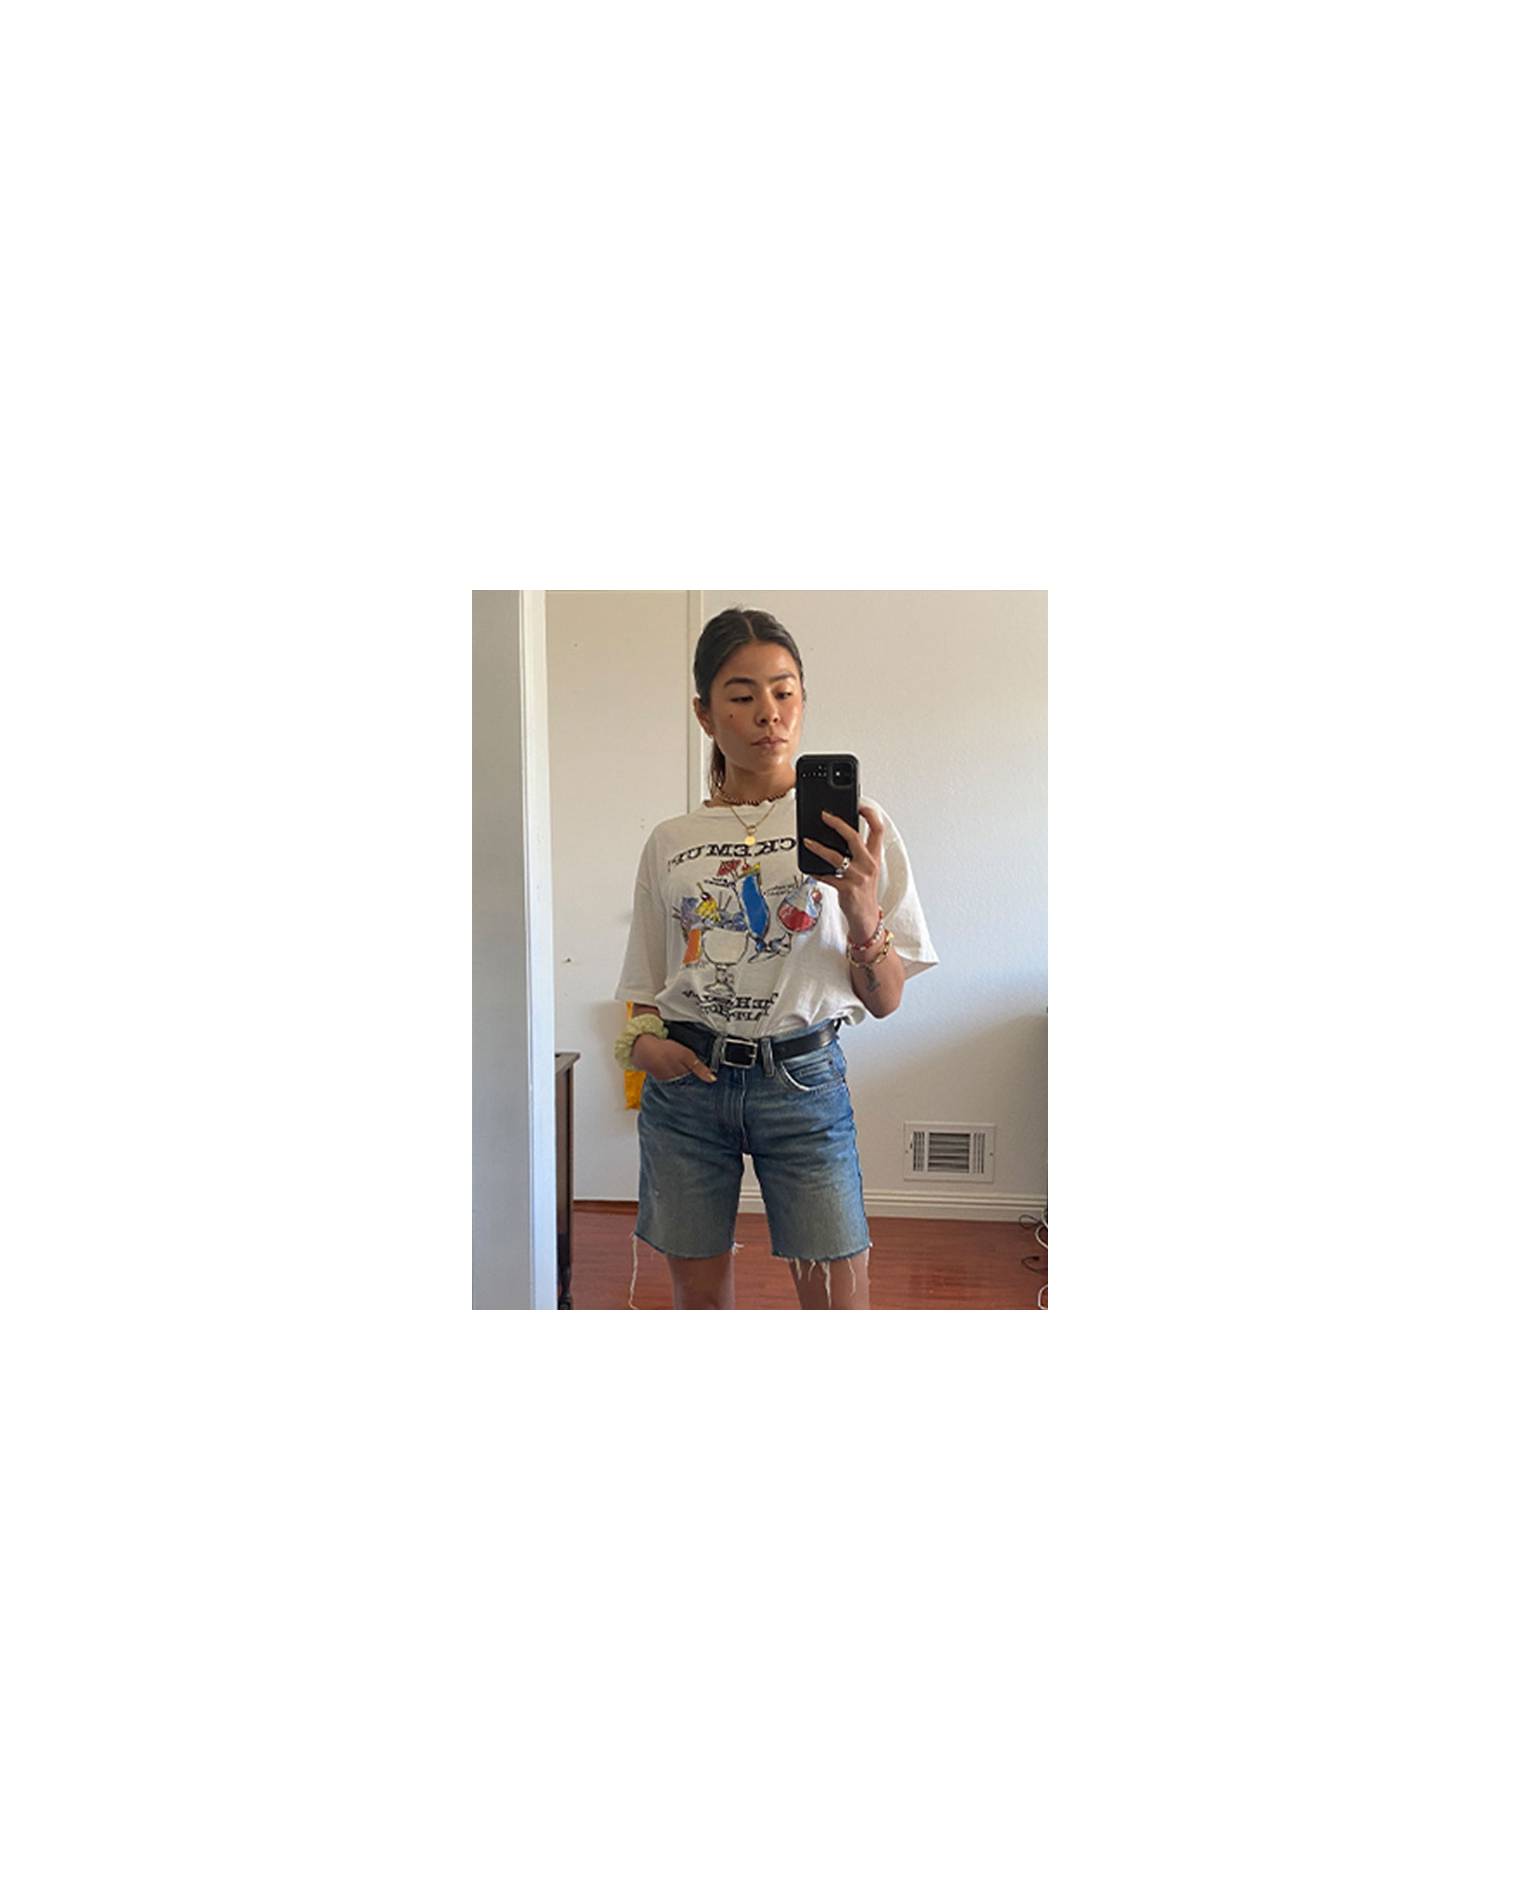 Mirror selfie of Katya Linehan. She is wearing a white graphic tee and cut-off Levi's.